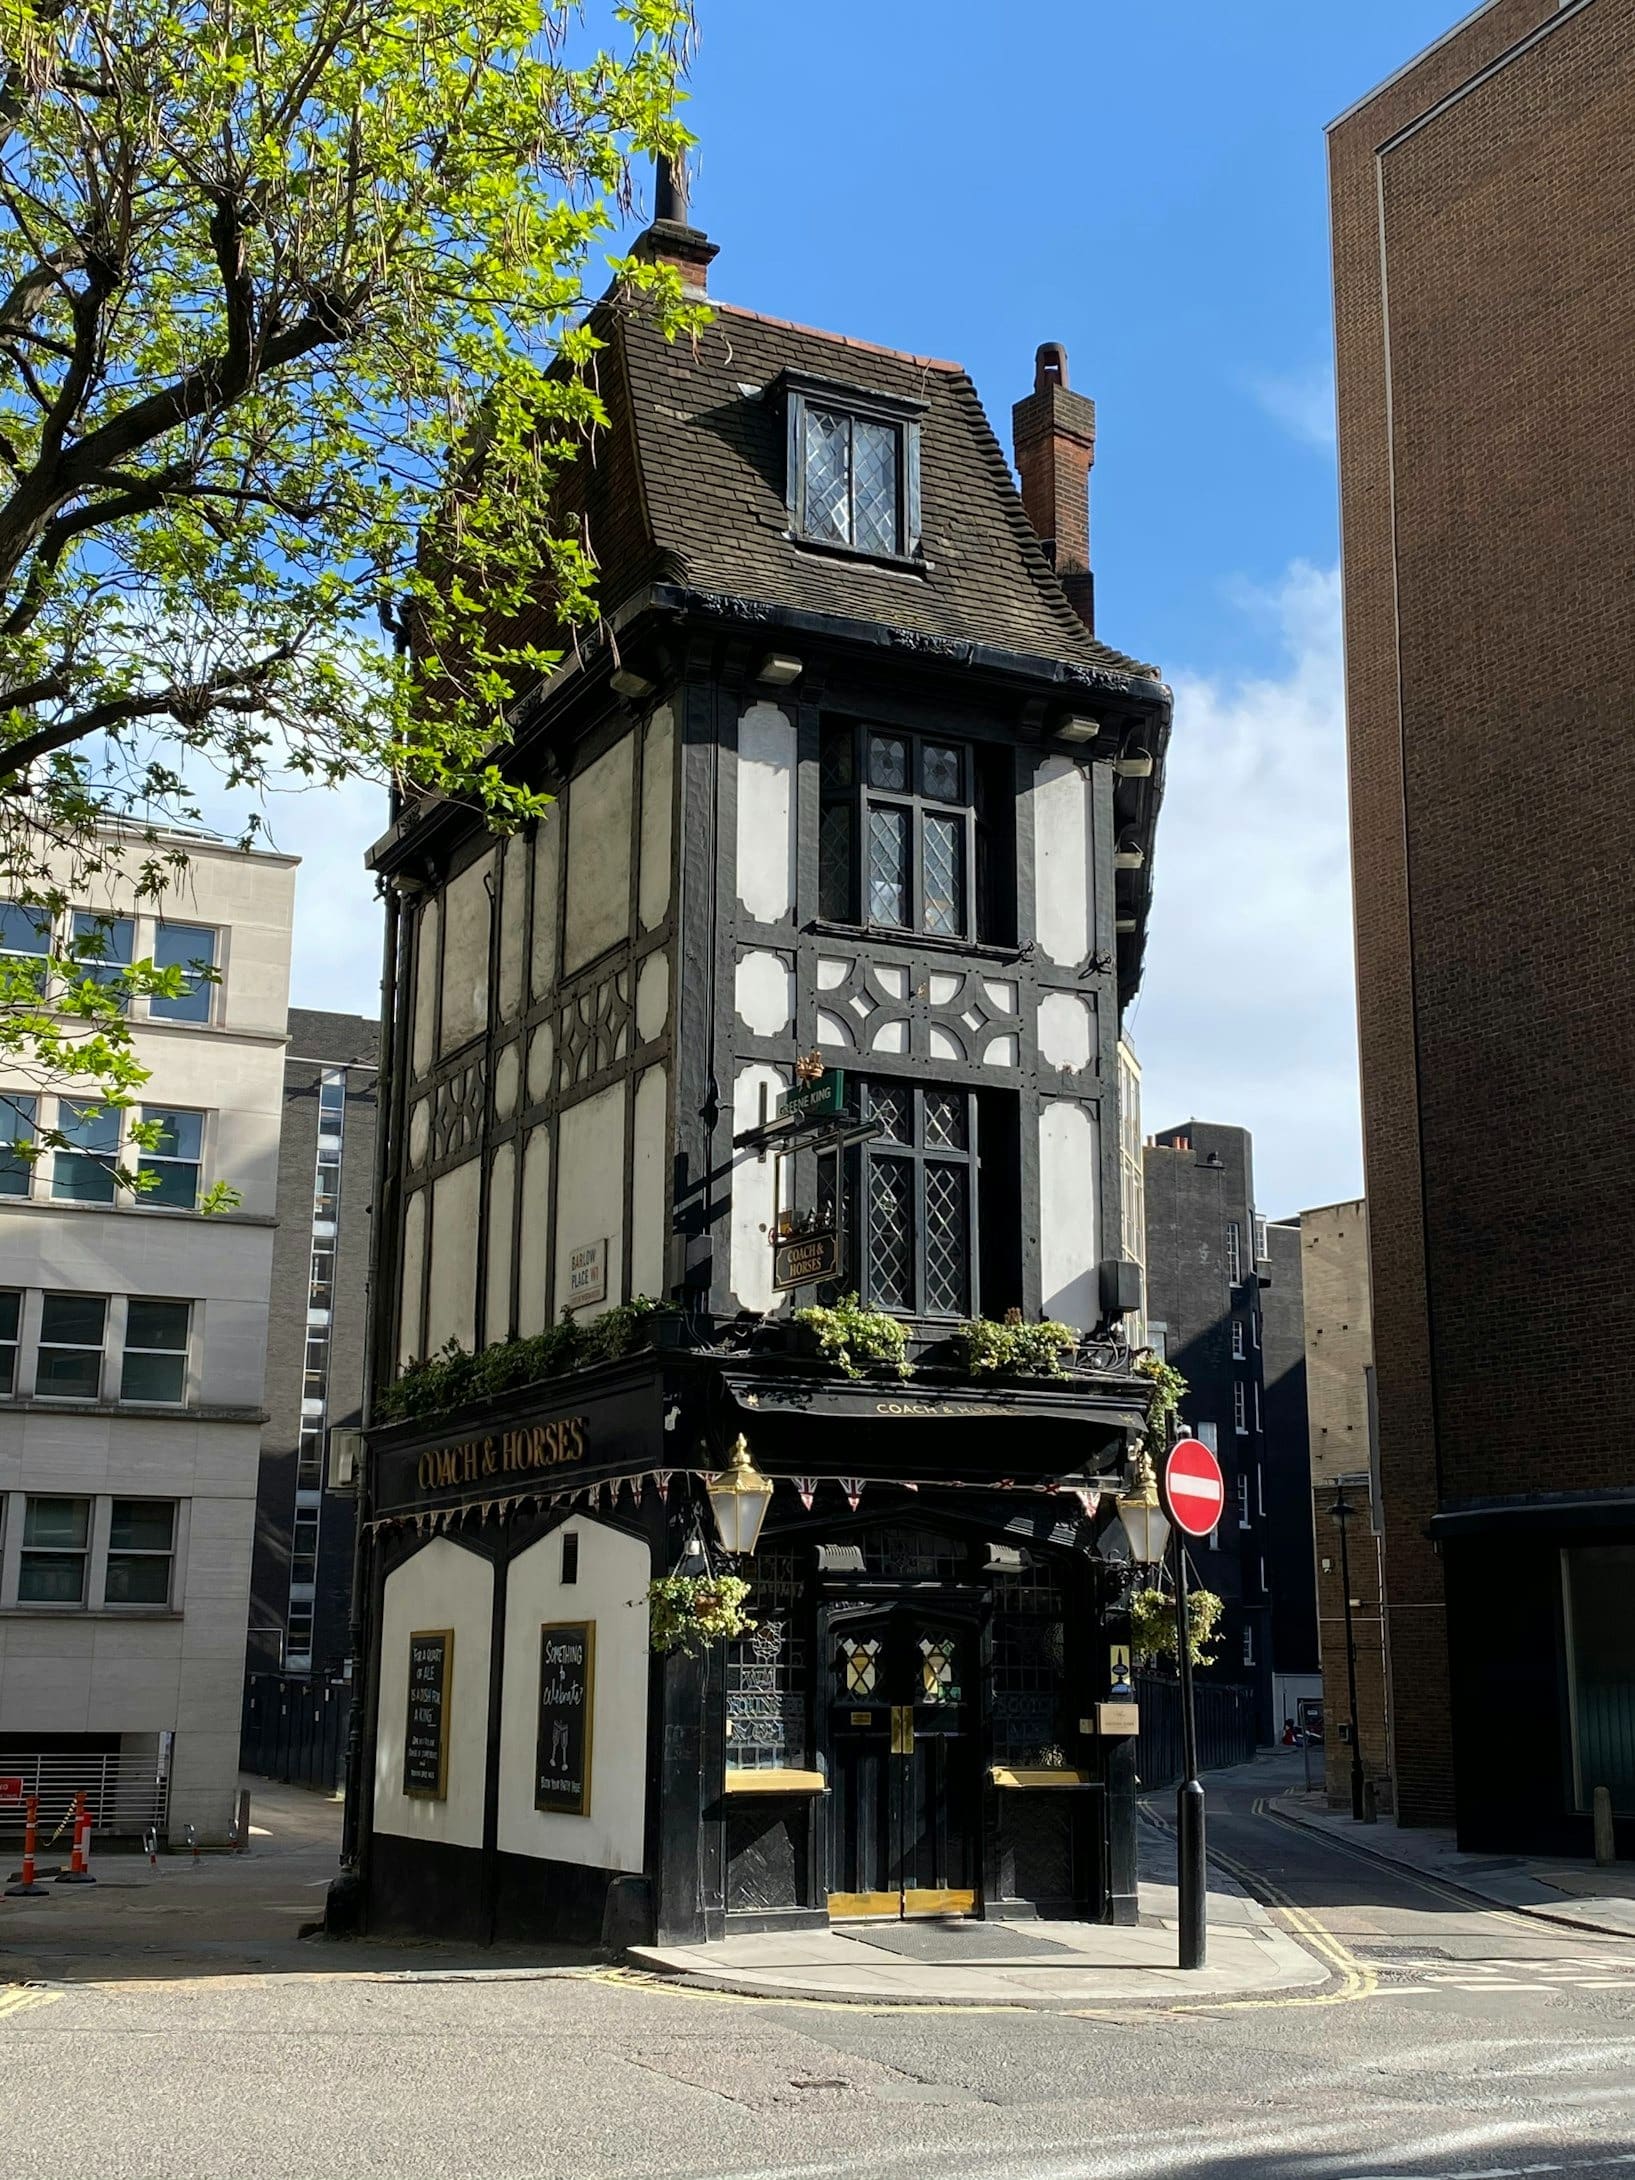 This has to be a contender for the narrowest pub in London